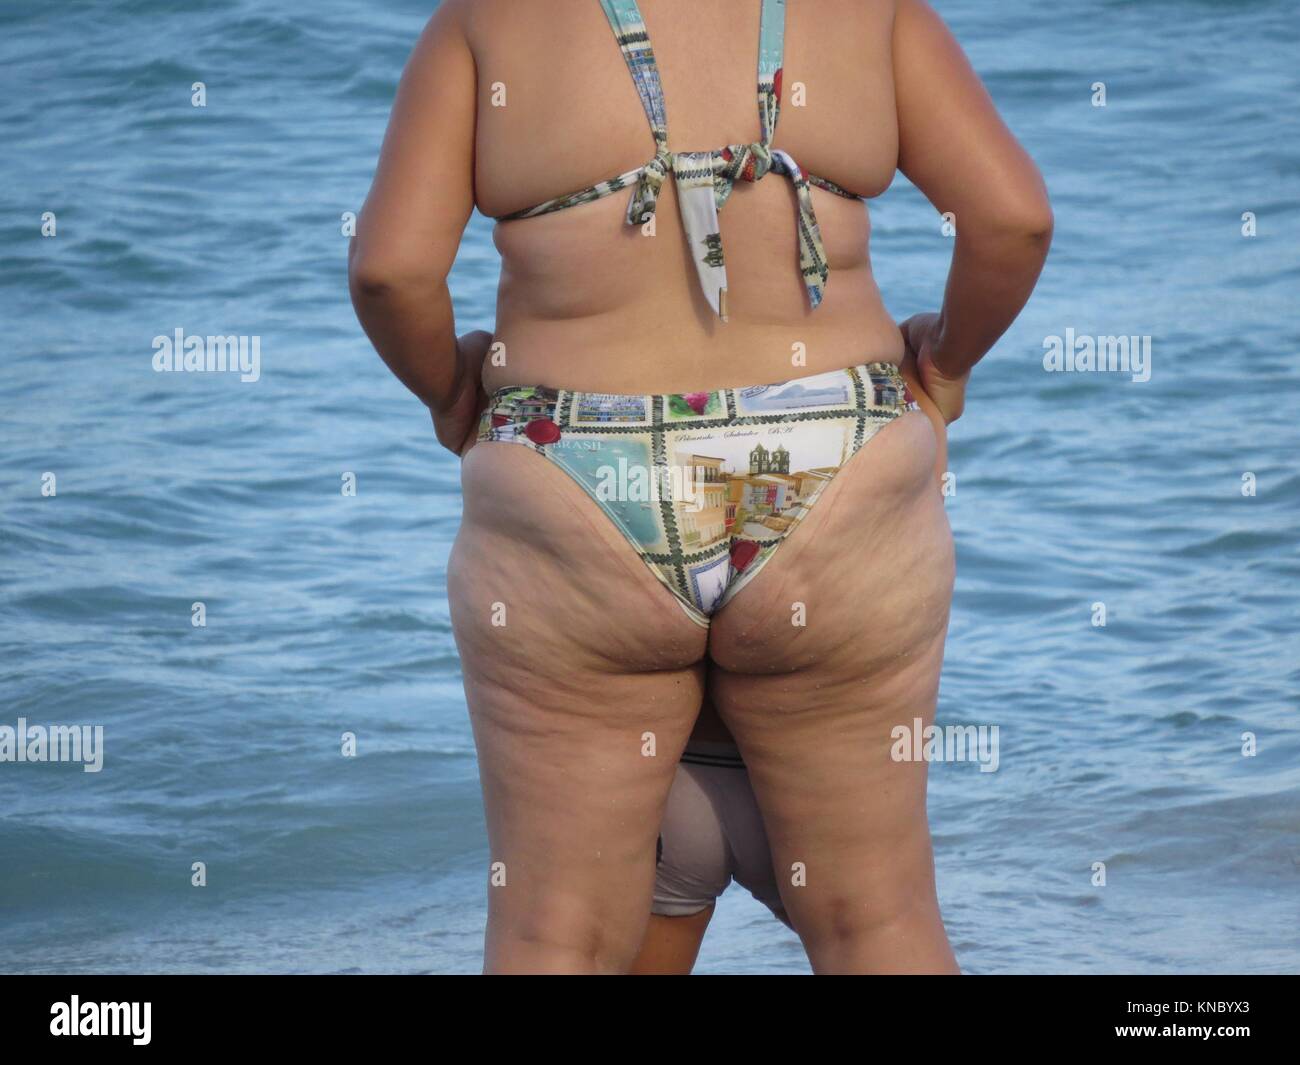 Cellulite in bathing suit Stock Photo